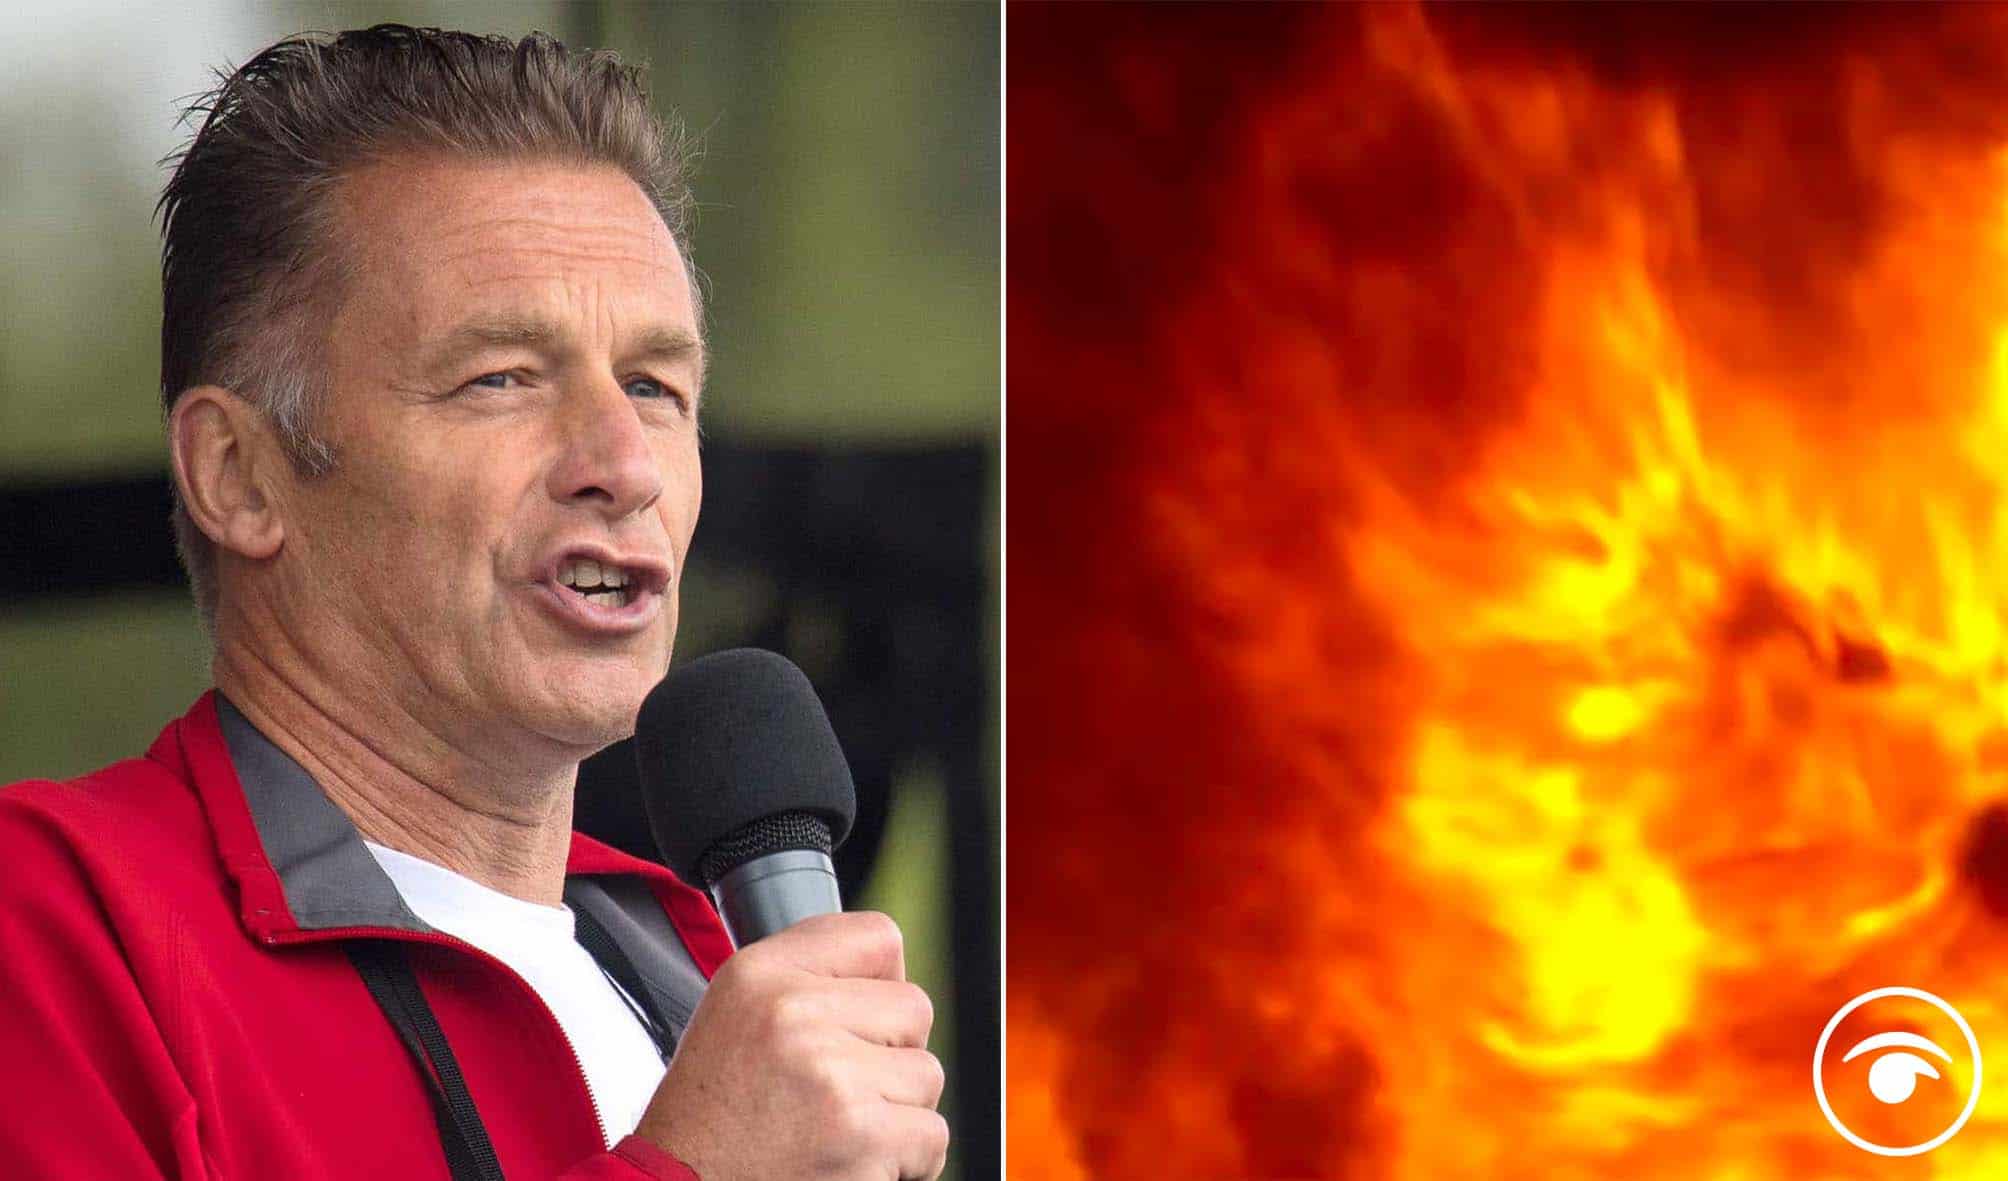 Watch: Chris Packham vows to carry on his end hunting activism despite arson attack at home